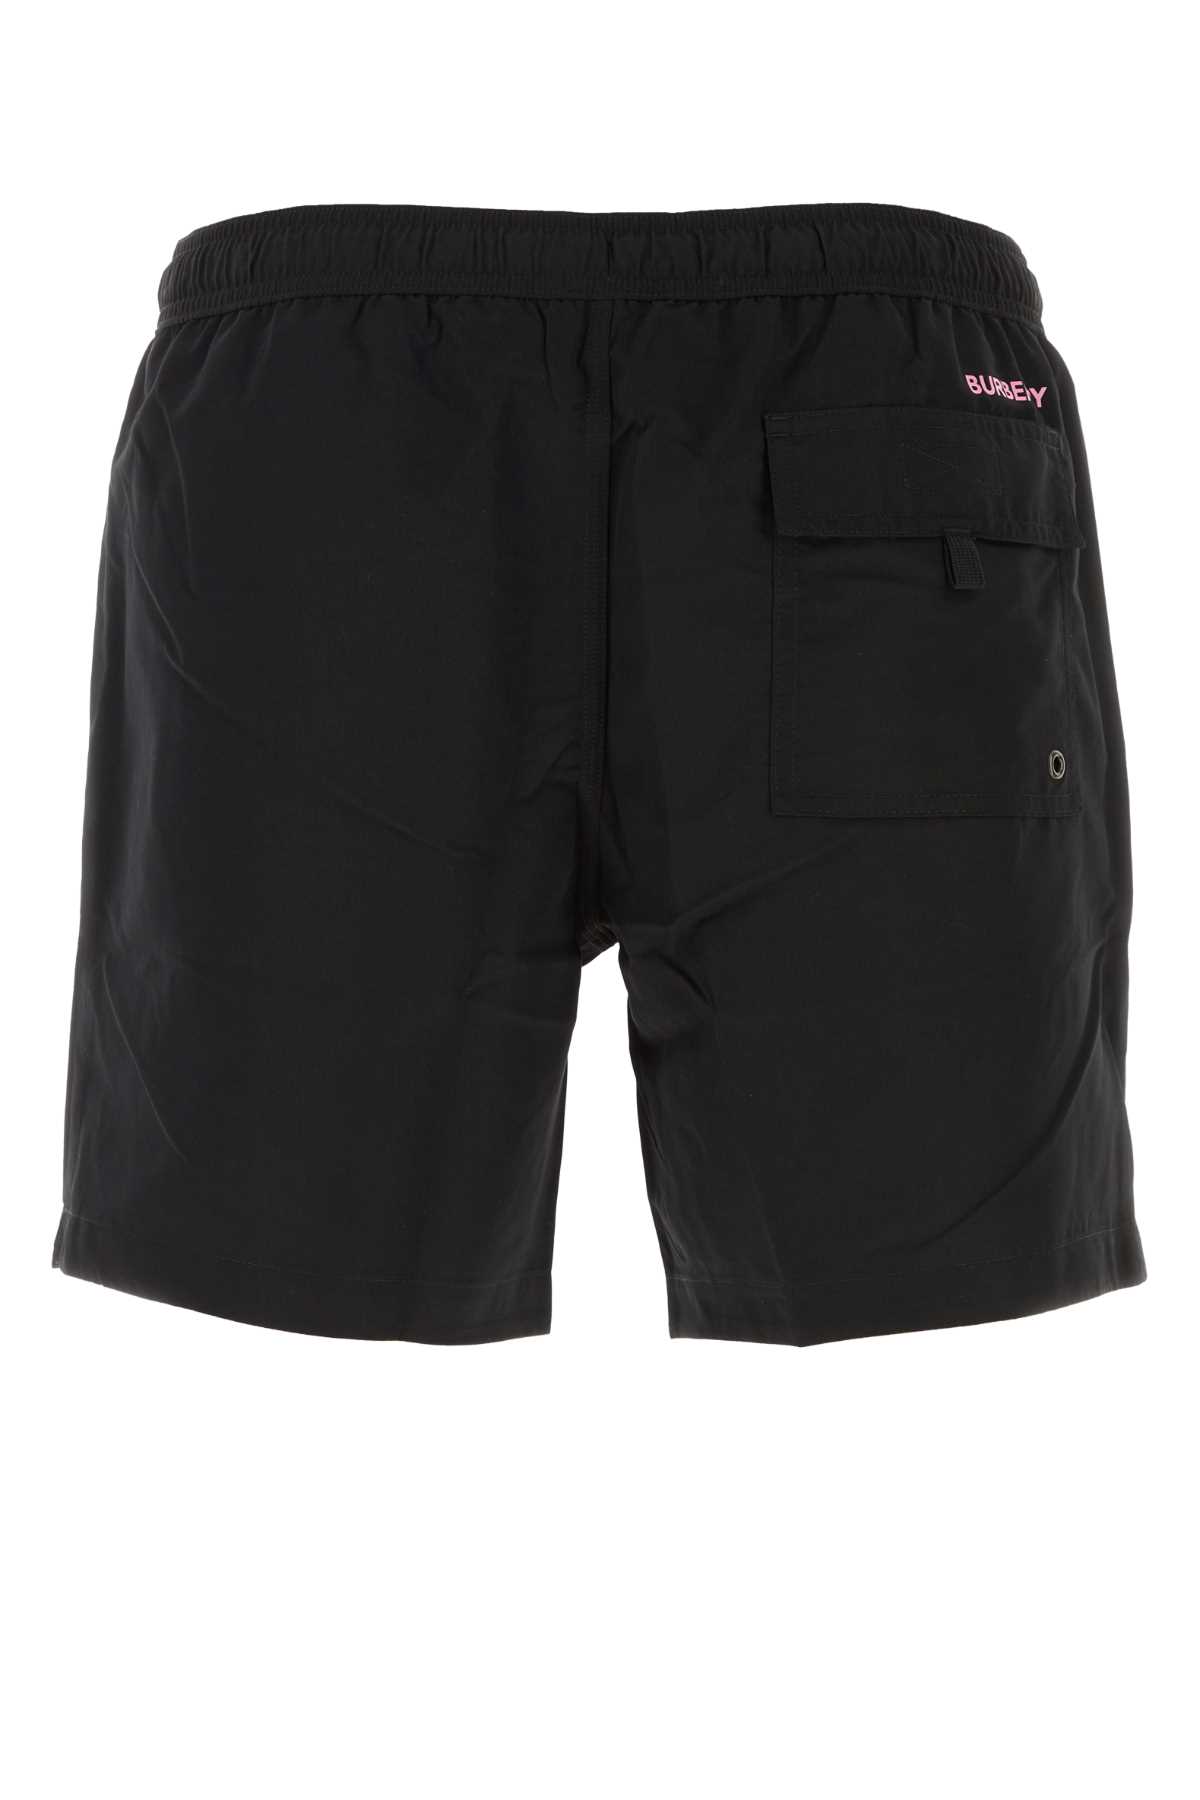 Burberry Black Polyester Swimming Shorts